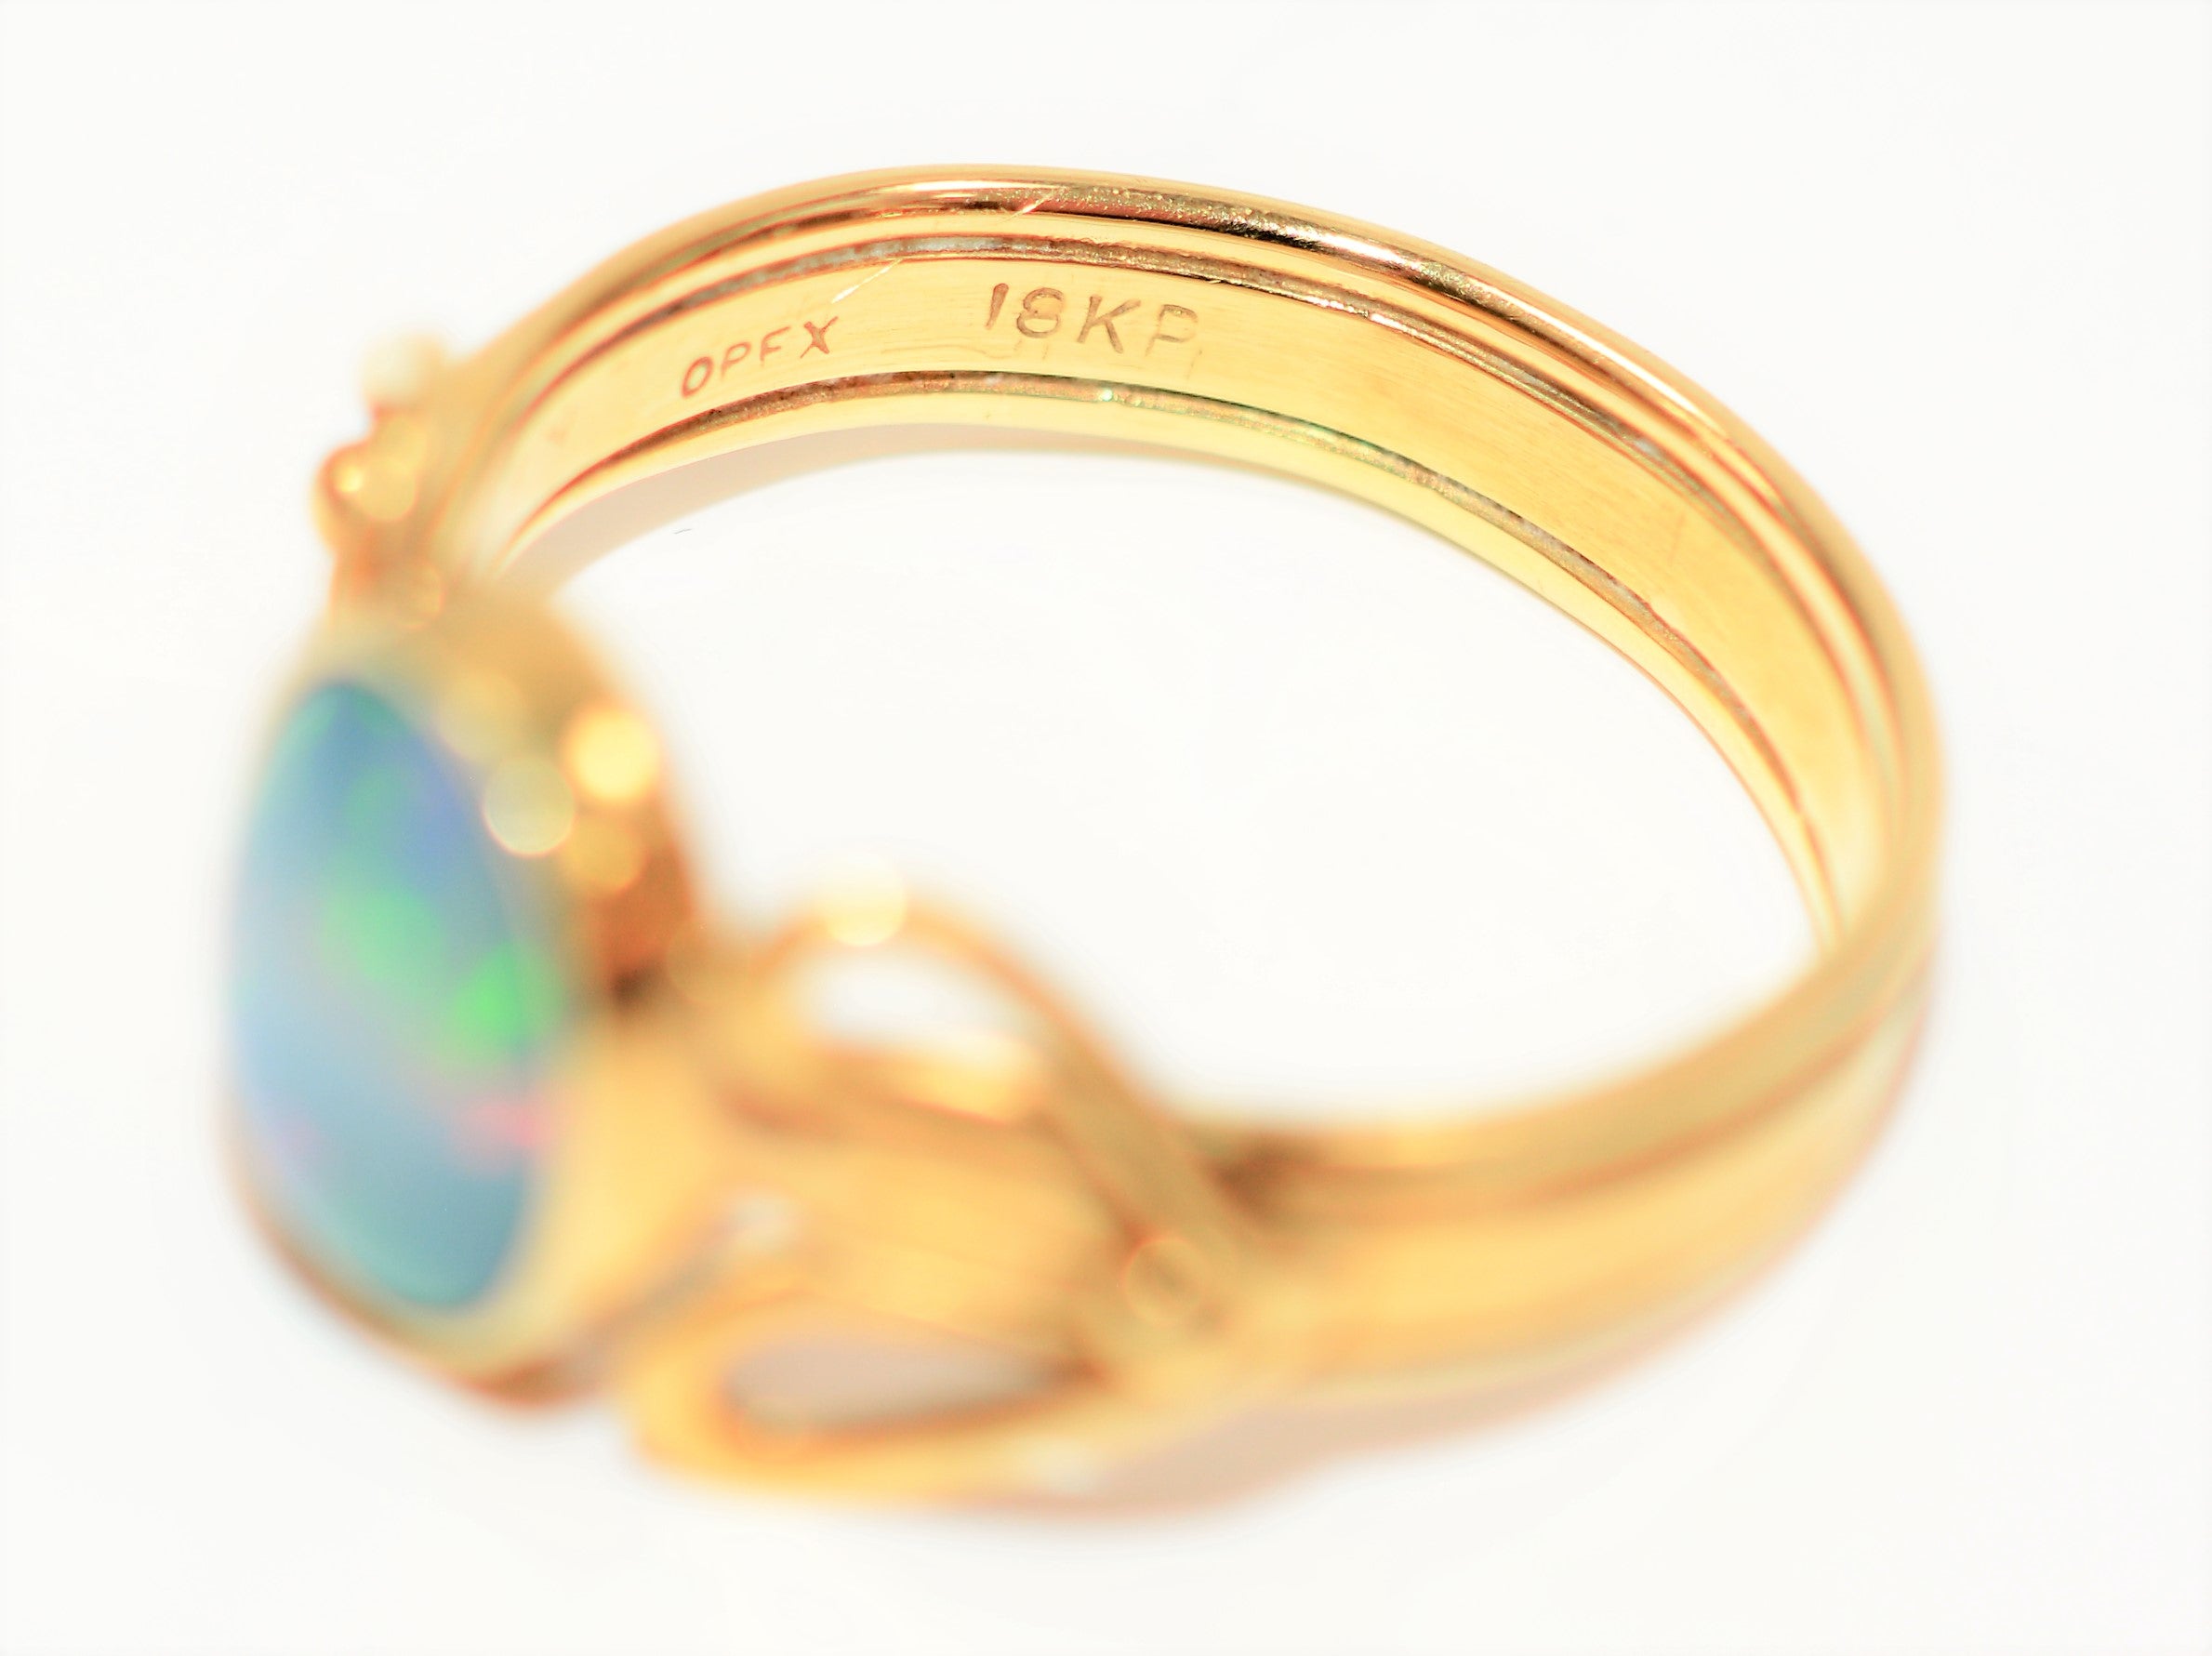 Opex Natural Black Opal Ring 18K Solid Gold 1.70ct Lightning Ridge Opal Ring Solitaire Ring Vintage Ring Birthstone Ring Estate Ring Jewelry